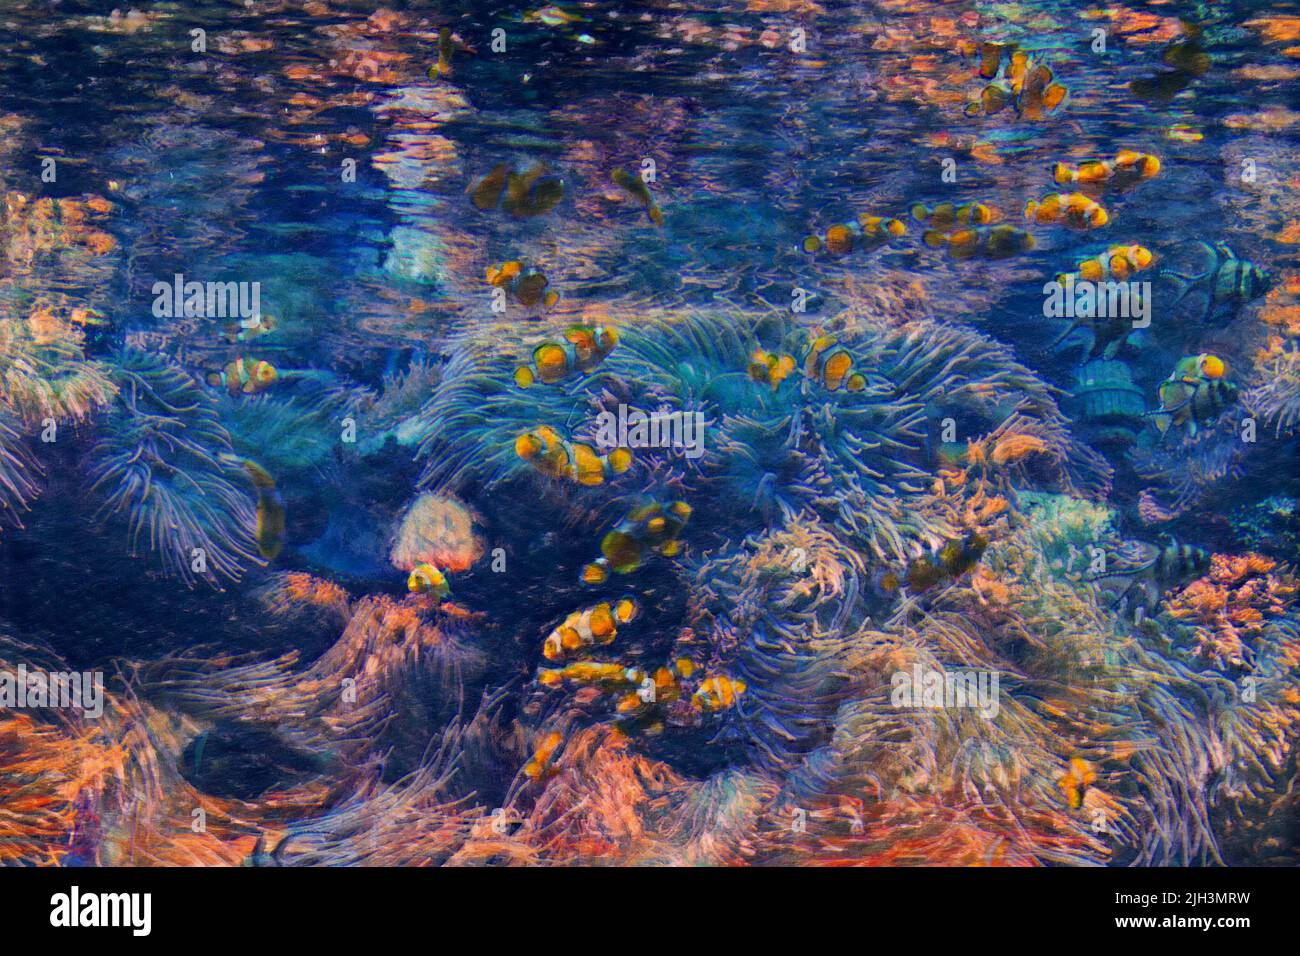 Large aquarium saltwater tank with bright, vibrant colors, Clown Fish, and other corral fish.  Edited to look like a colorful painting. Stock Photo